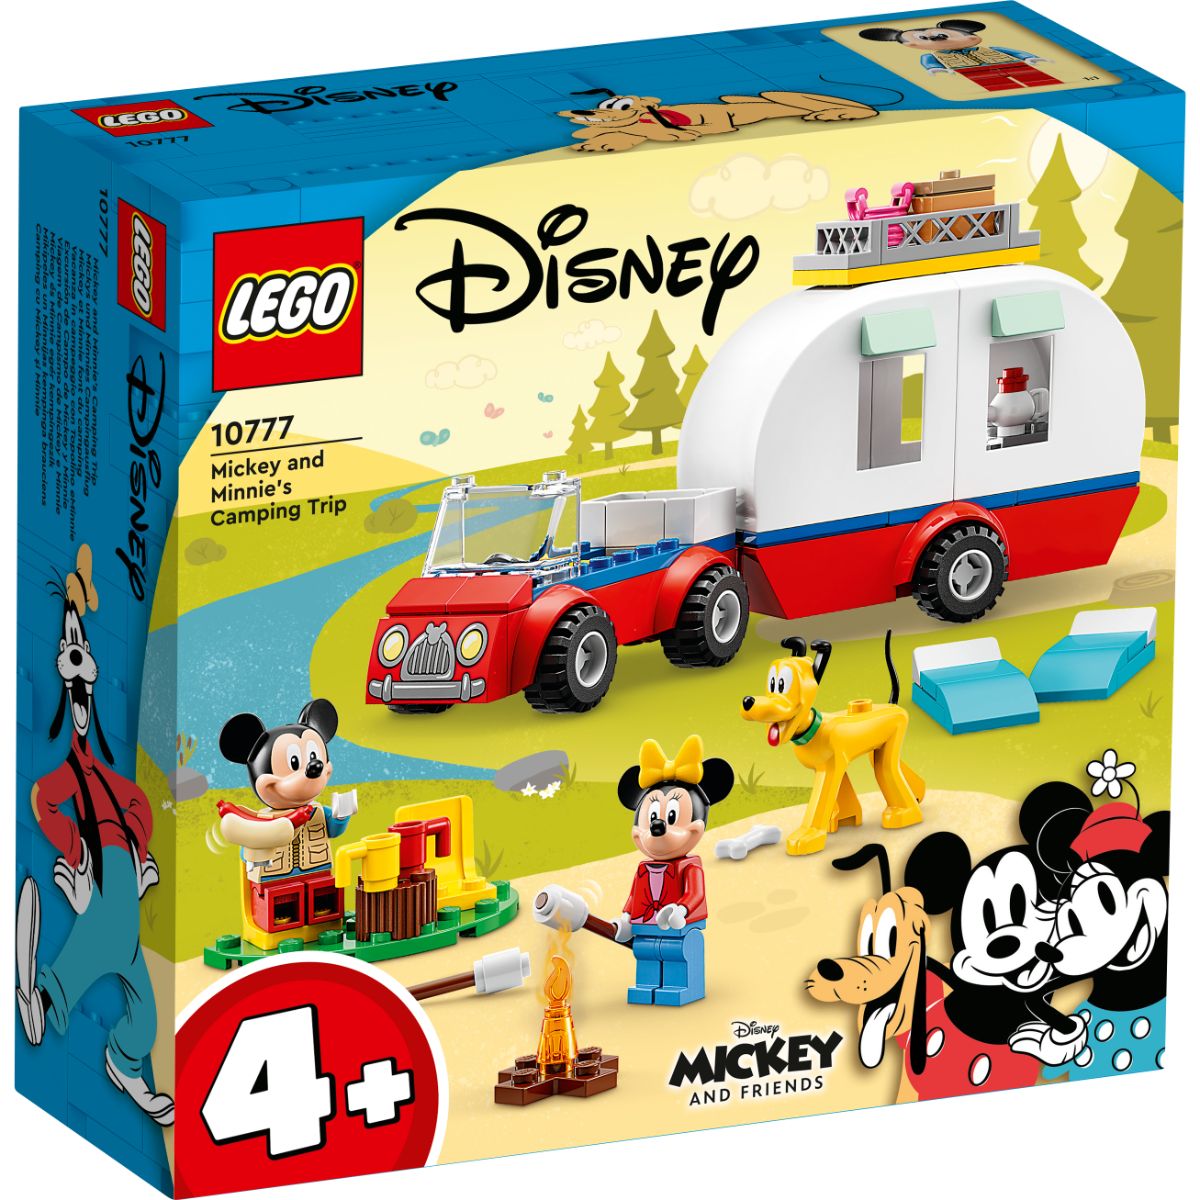 LEGO® Disney Mickey and Friends – Camping cu Mickey Mouse si Minnie Mouse (10777) (10777) imagine 2022 protejamcopilaria.ro